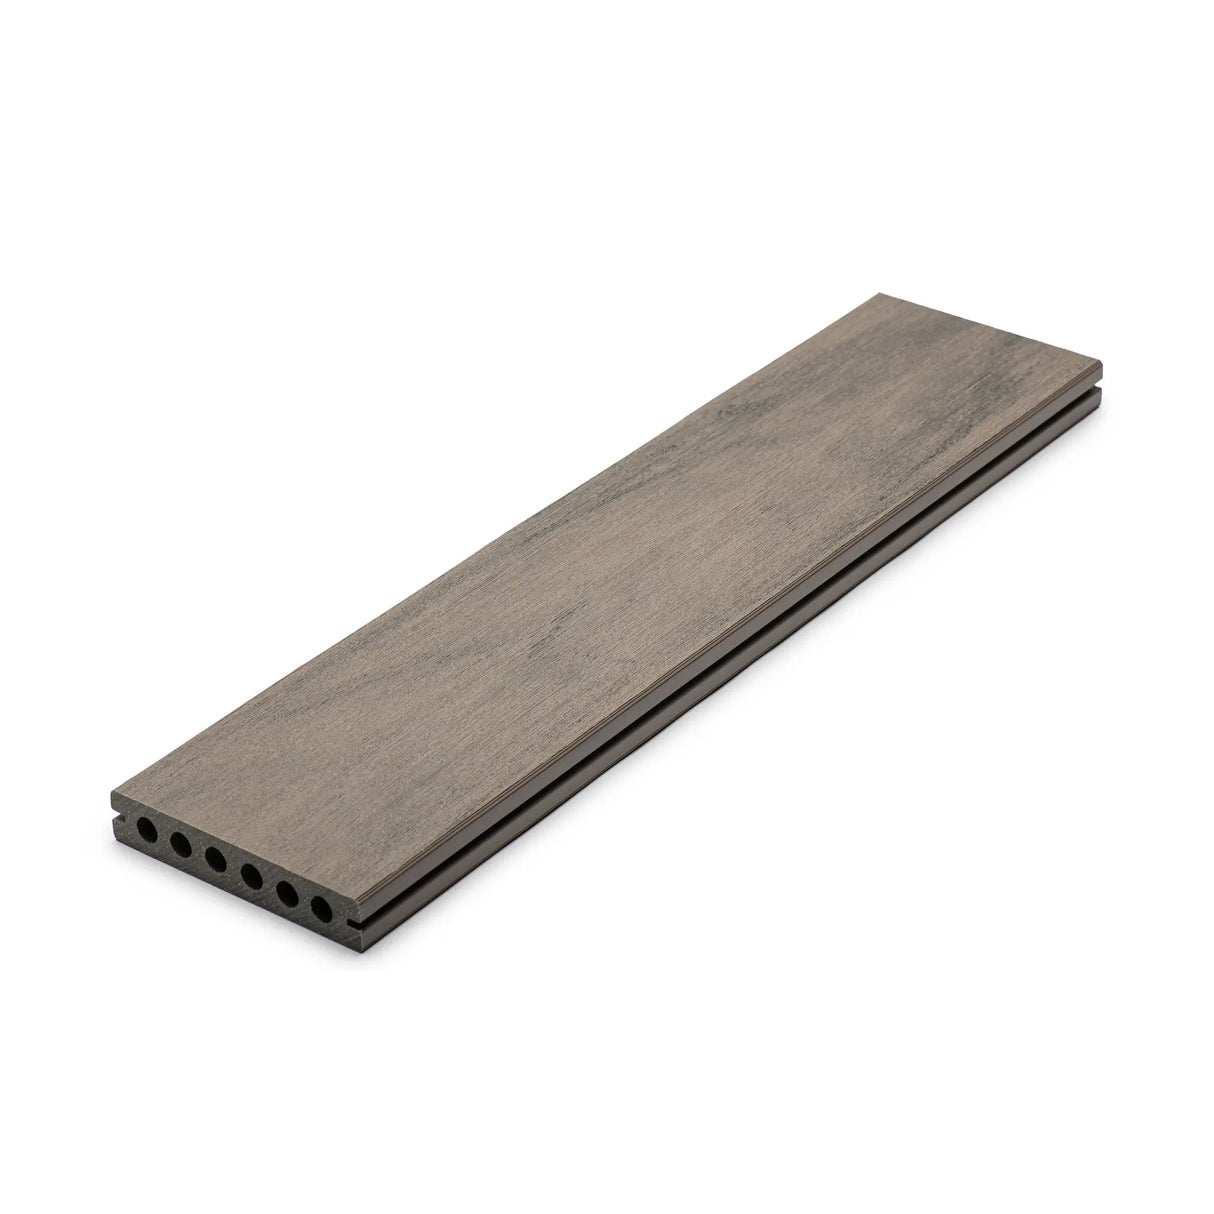 TruNorth® Enviroboards Composite Decking from $3.45/ft - Quebec